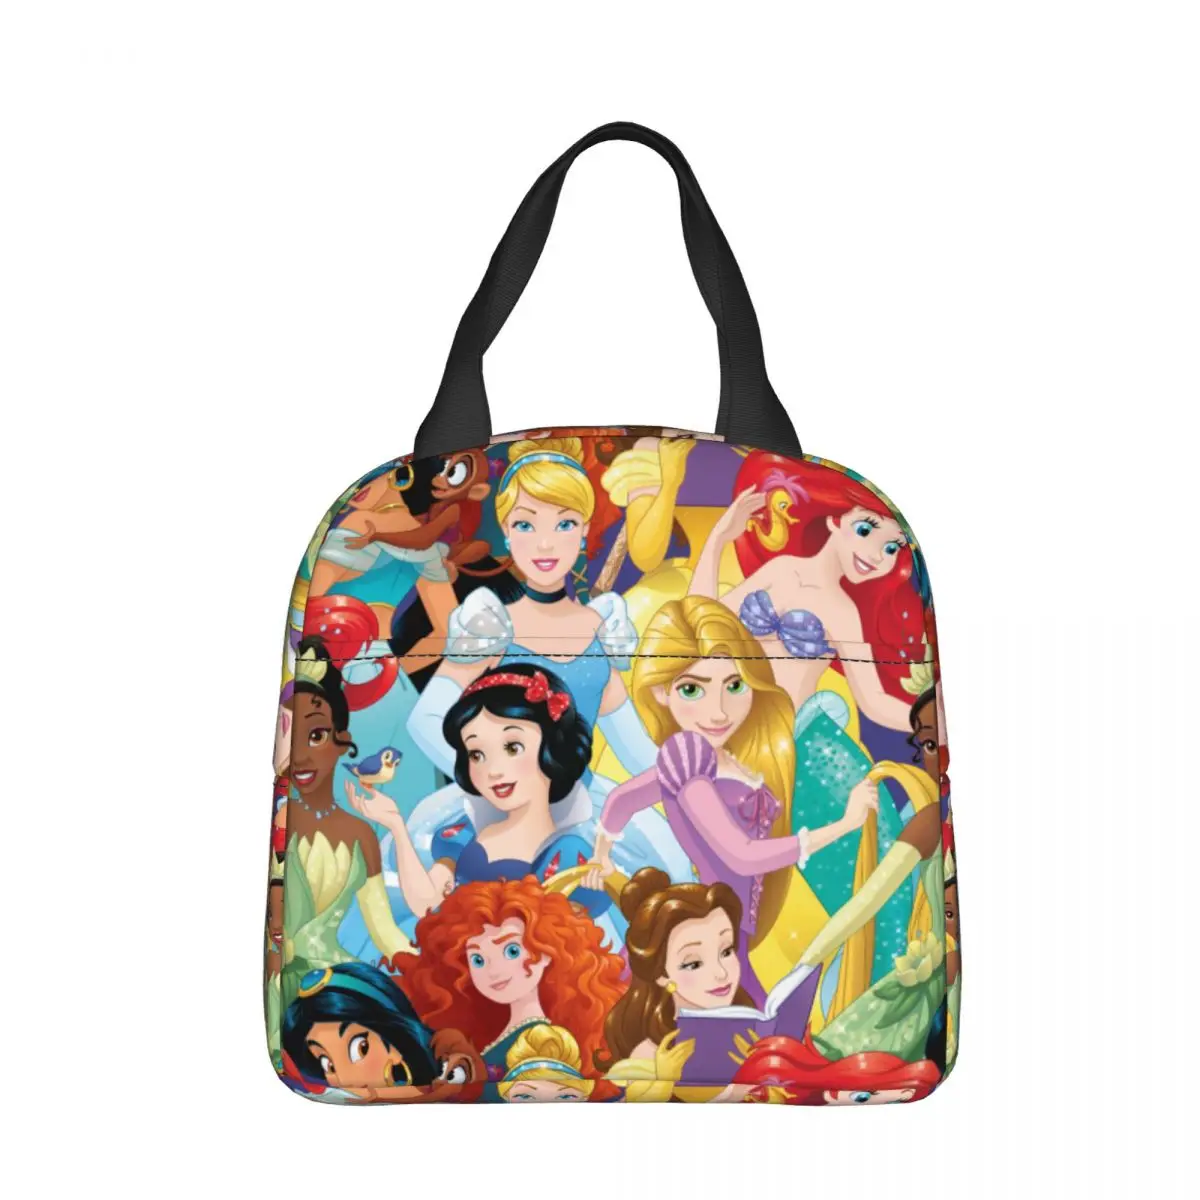 

Disney Princess Belle Insulated Lunch Bags Portable Belle Snow White Ariel Reusable Cooler Bag Tote Travel Food Storage Bags